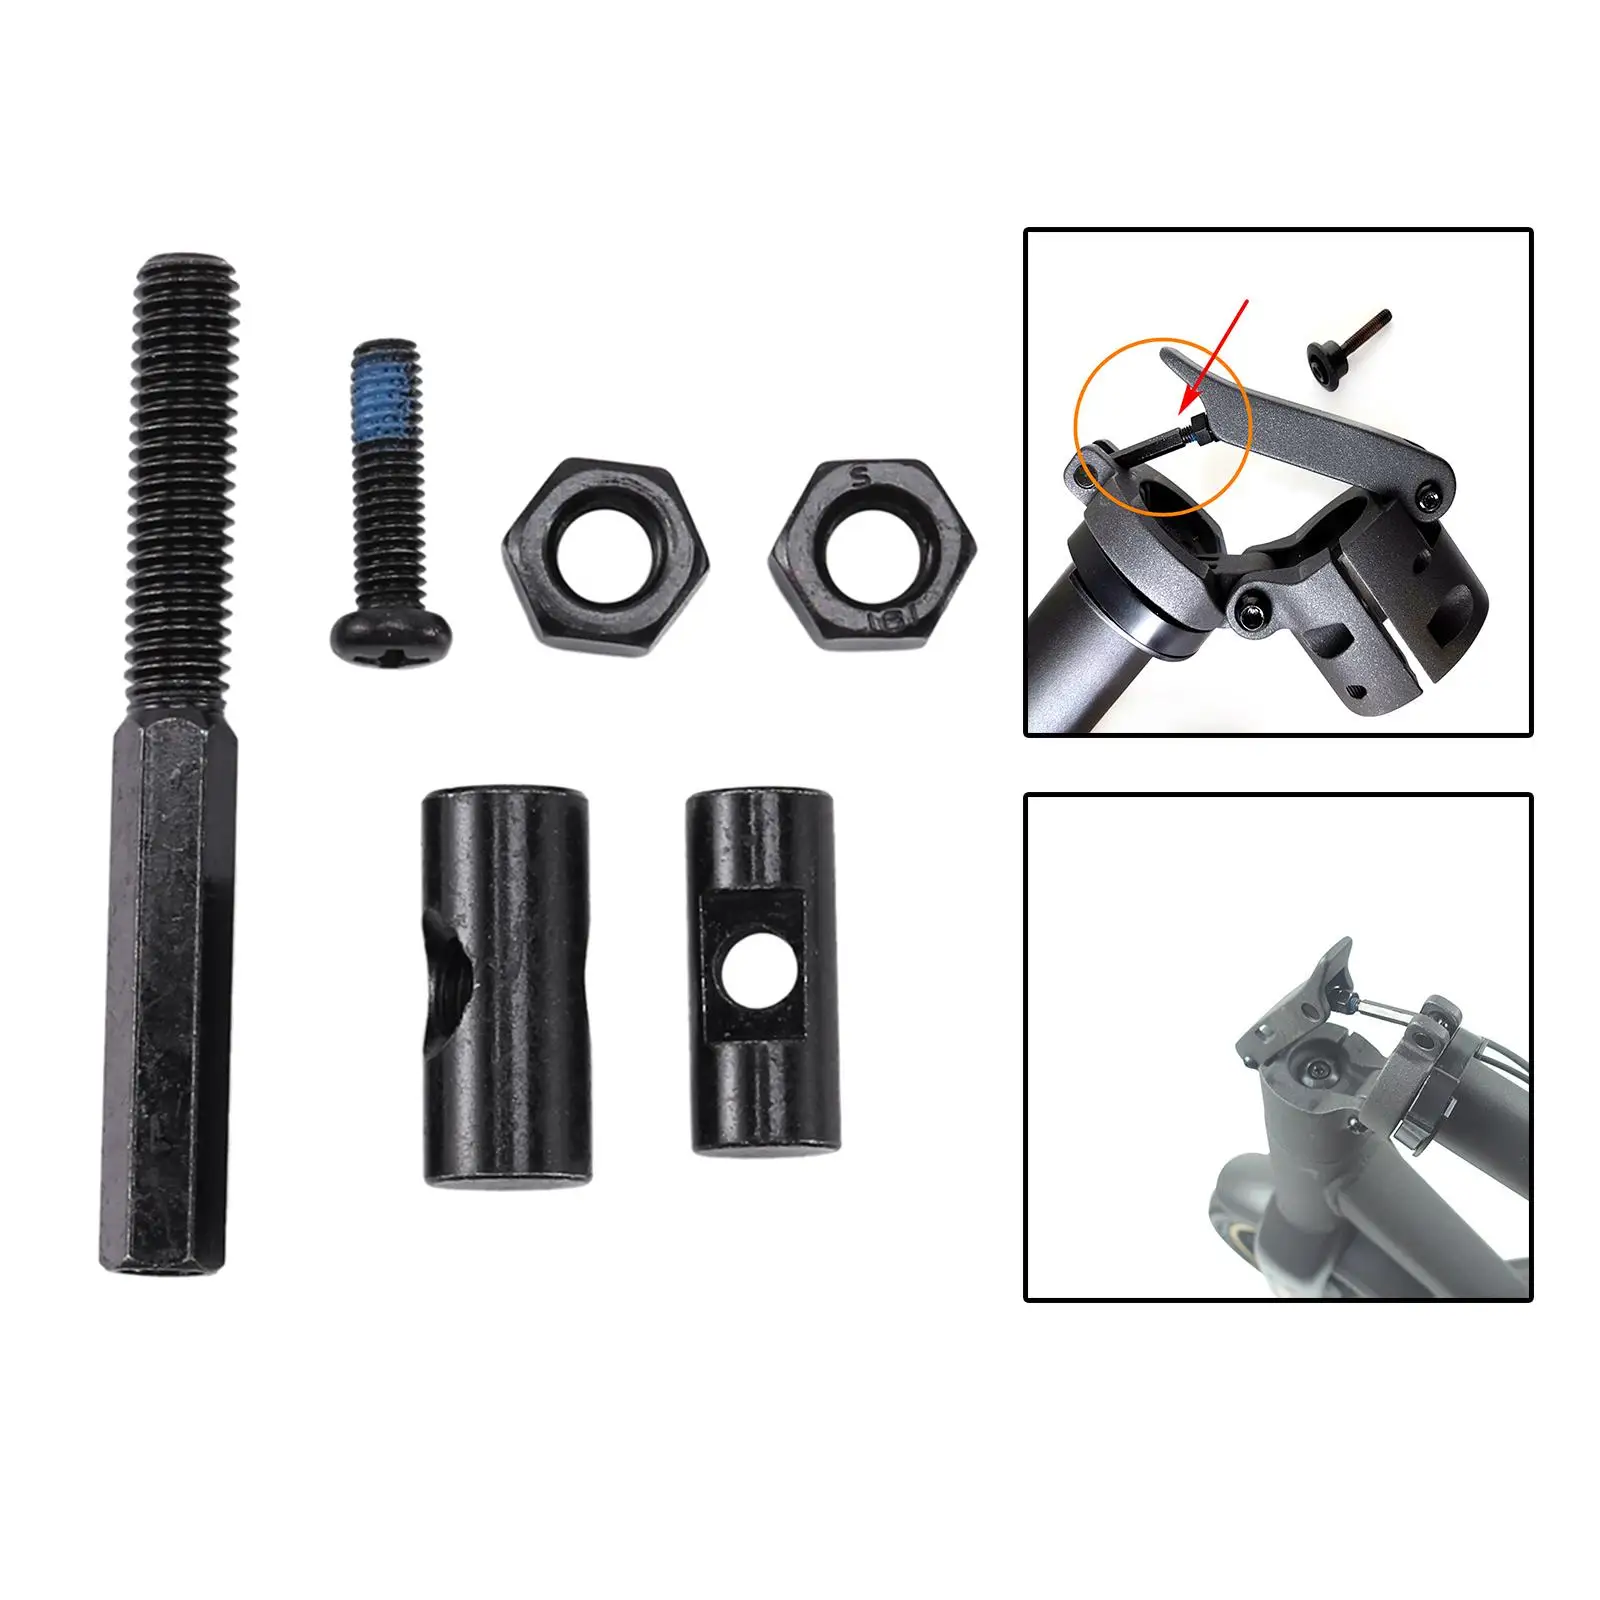 Shaft Locking Screw Wear Resistant Hard Accessories Assembly 